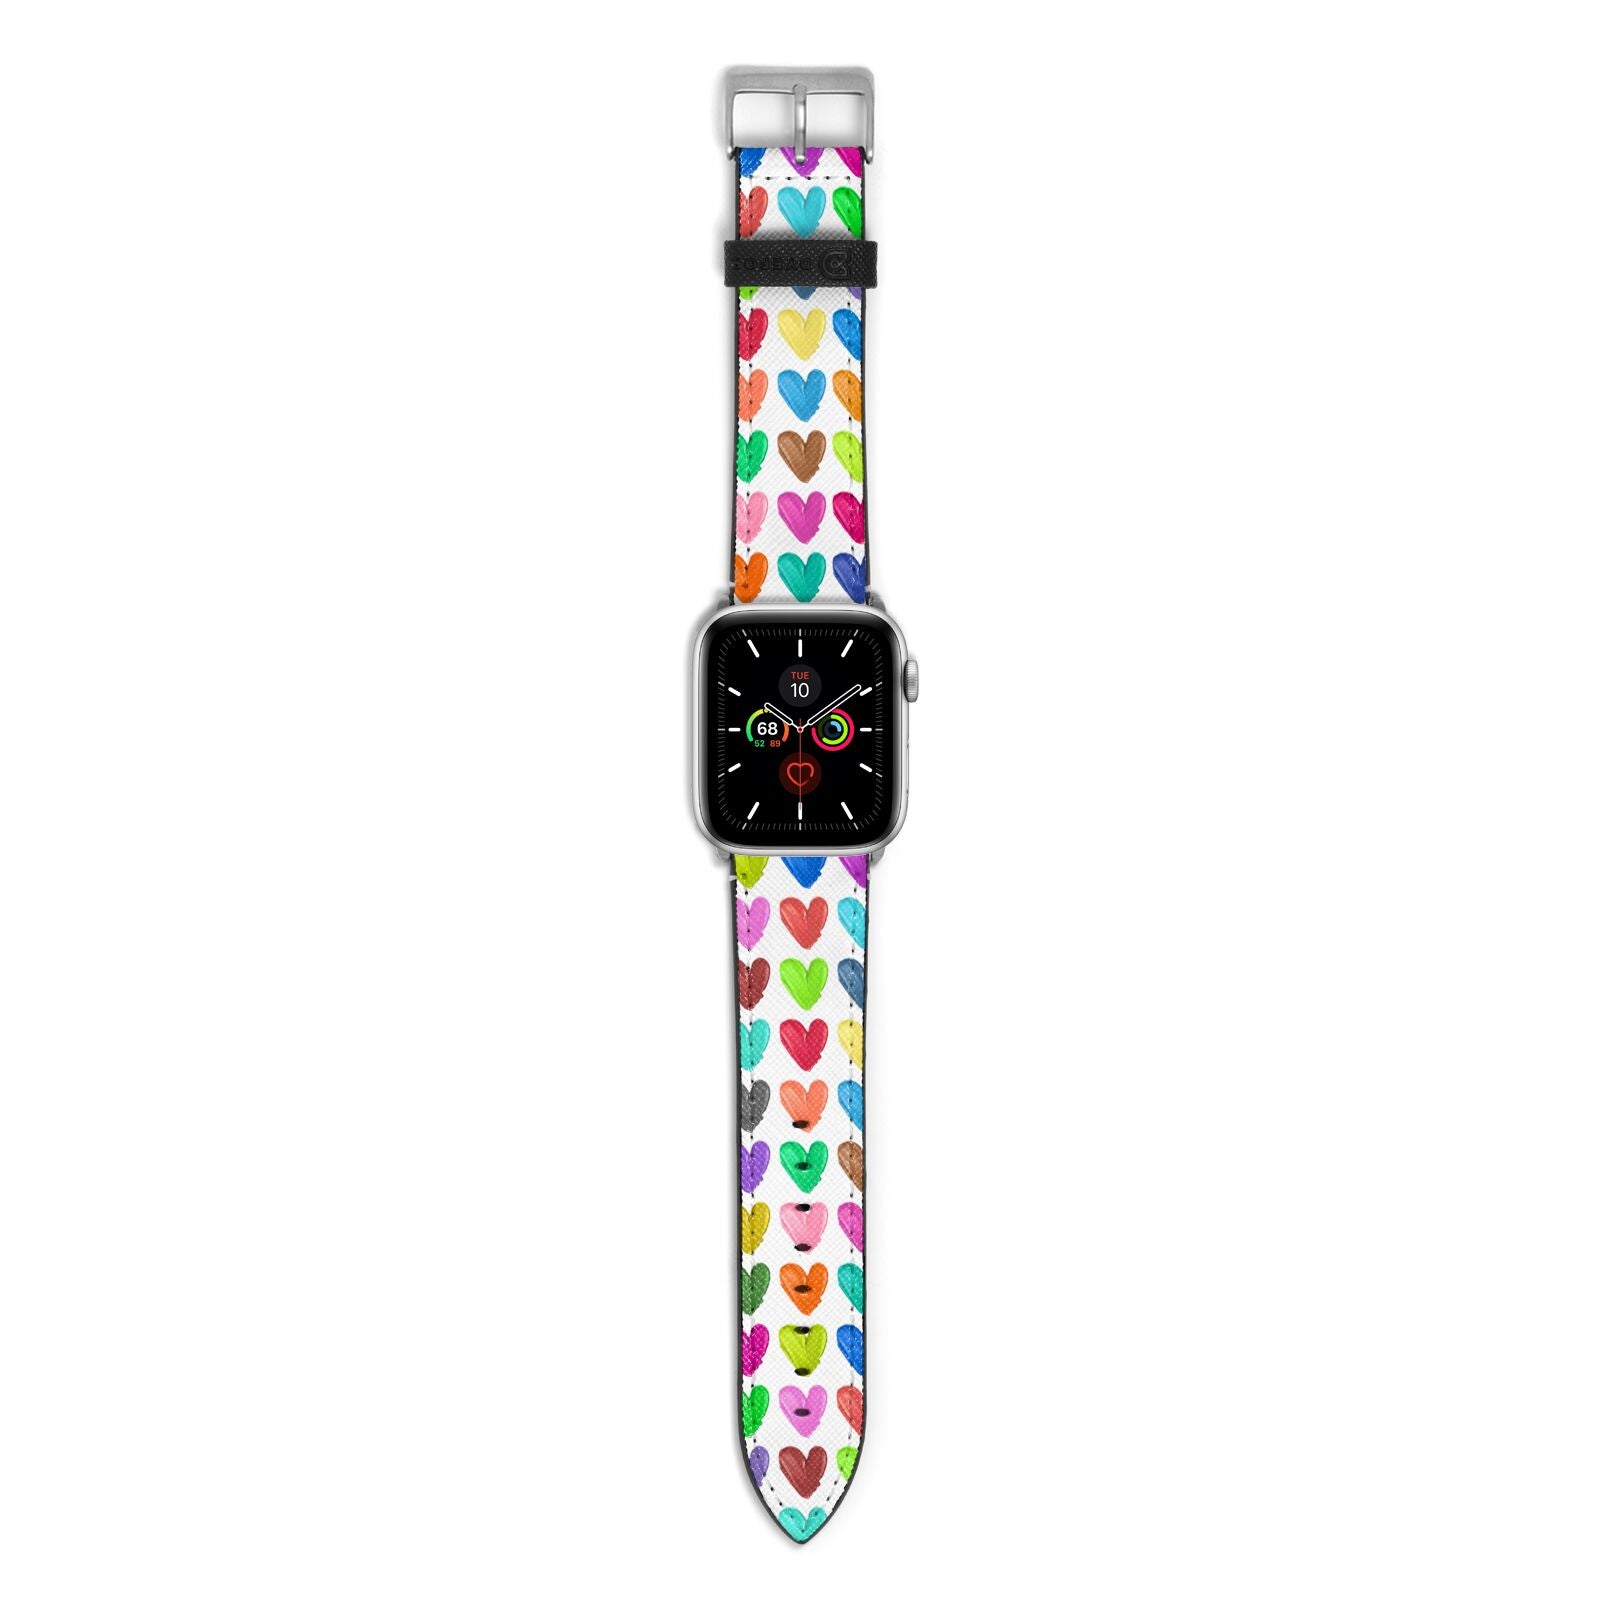 Polka Heart Apple Watch Strap with Silver Hardware